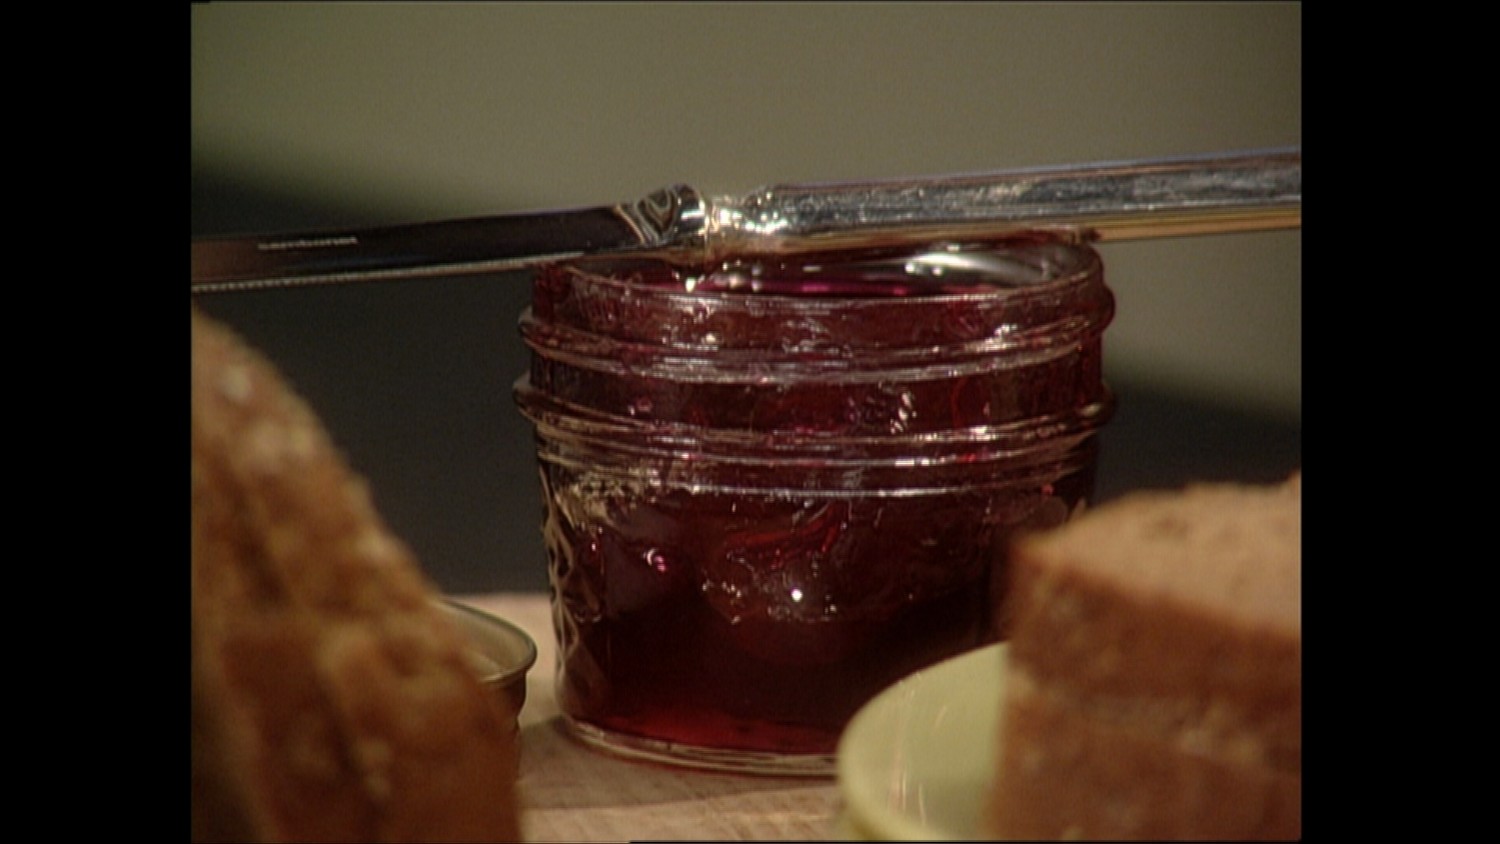 What is a gourmet recipe for Concord grape jam?